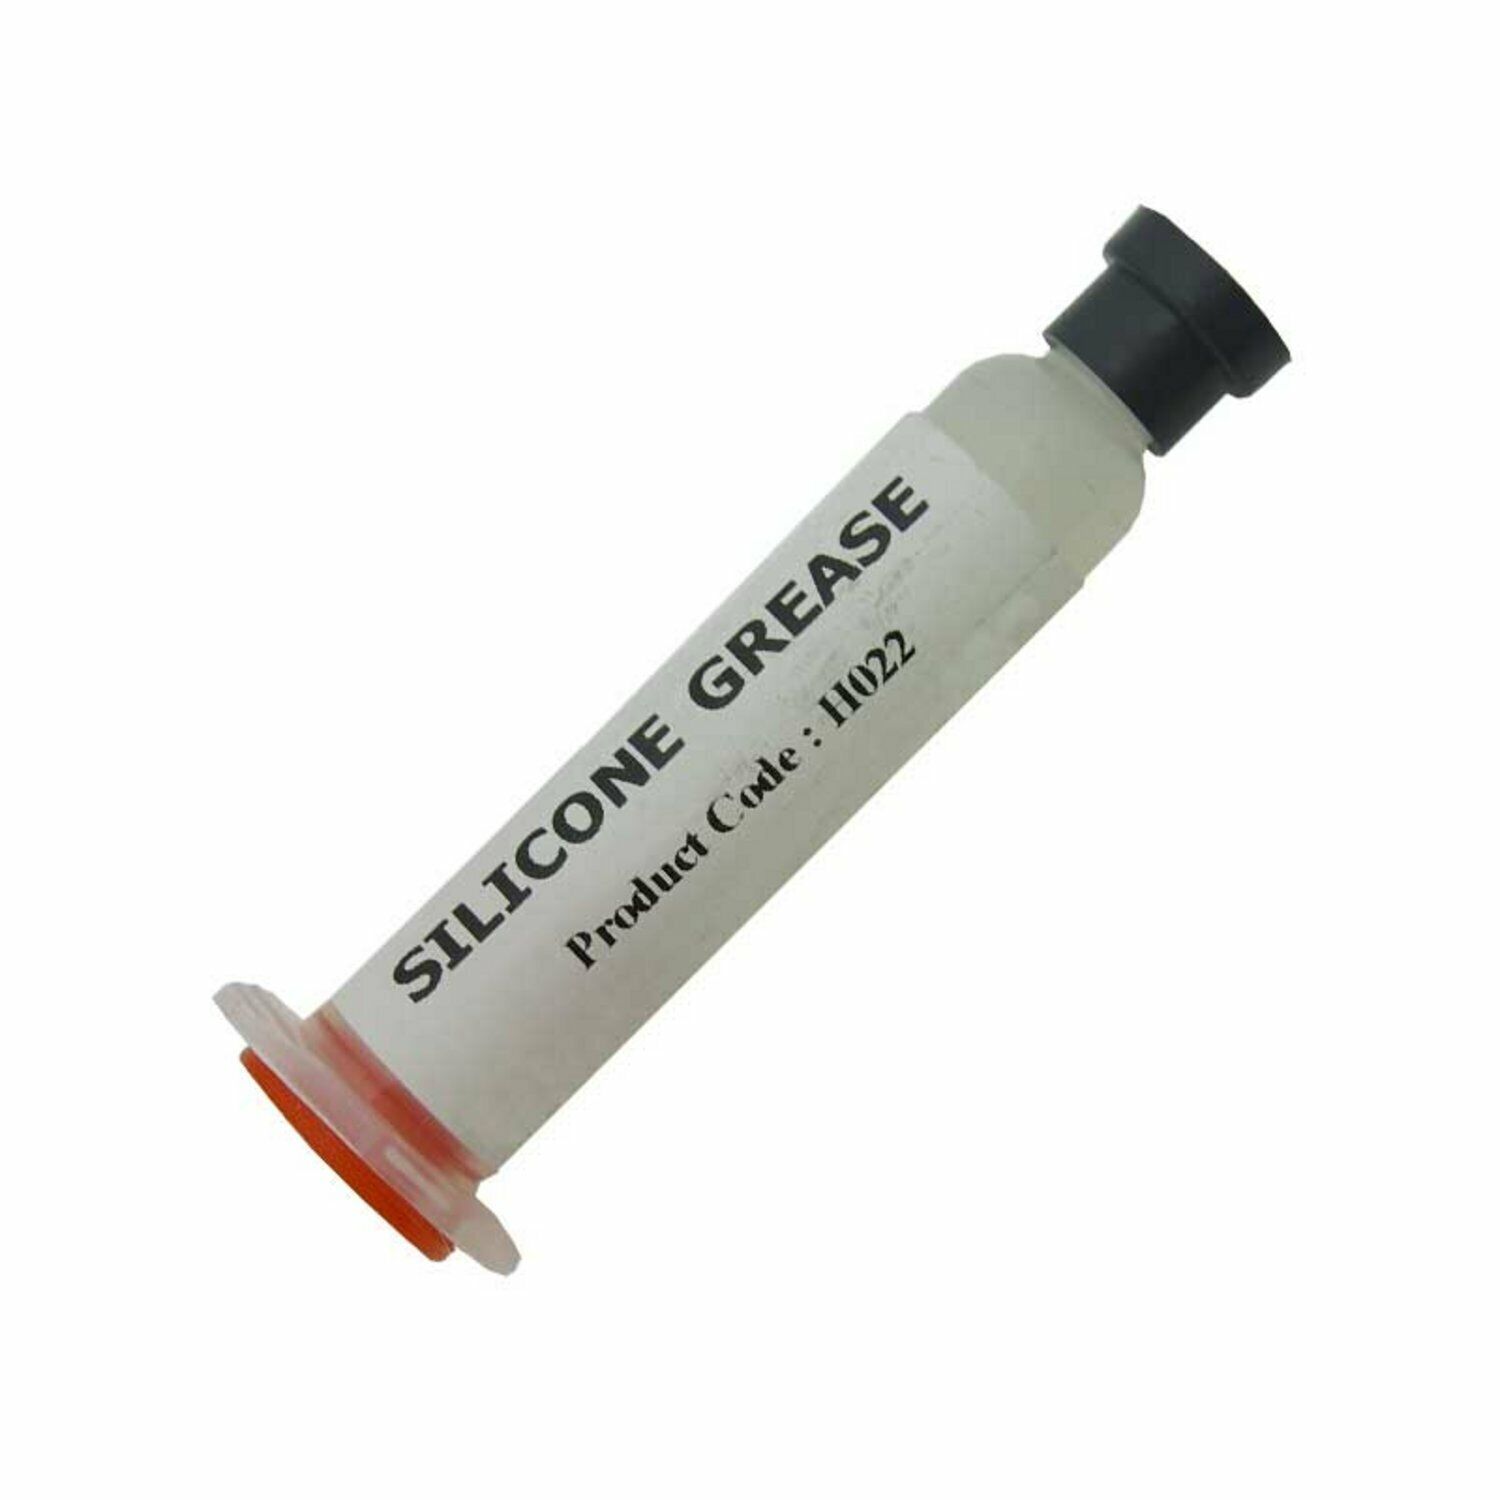 Silicone Grease For Aoyue B1003a And B1002a Desoldering Gun Rework Station